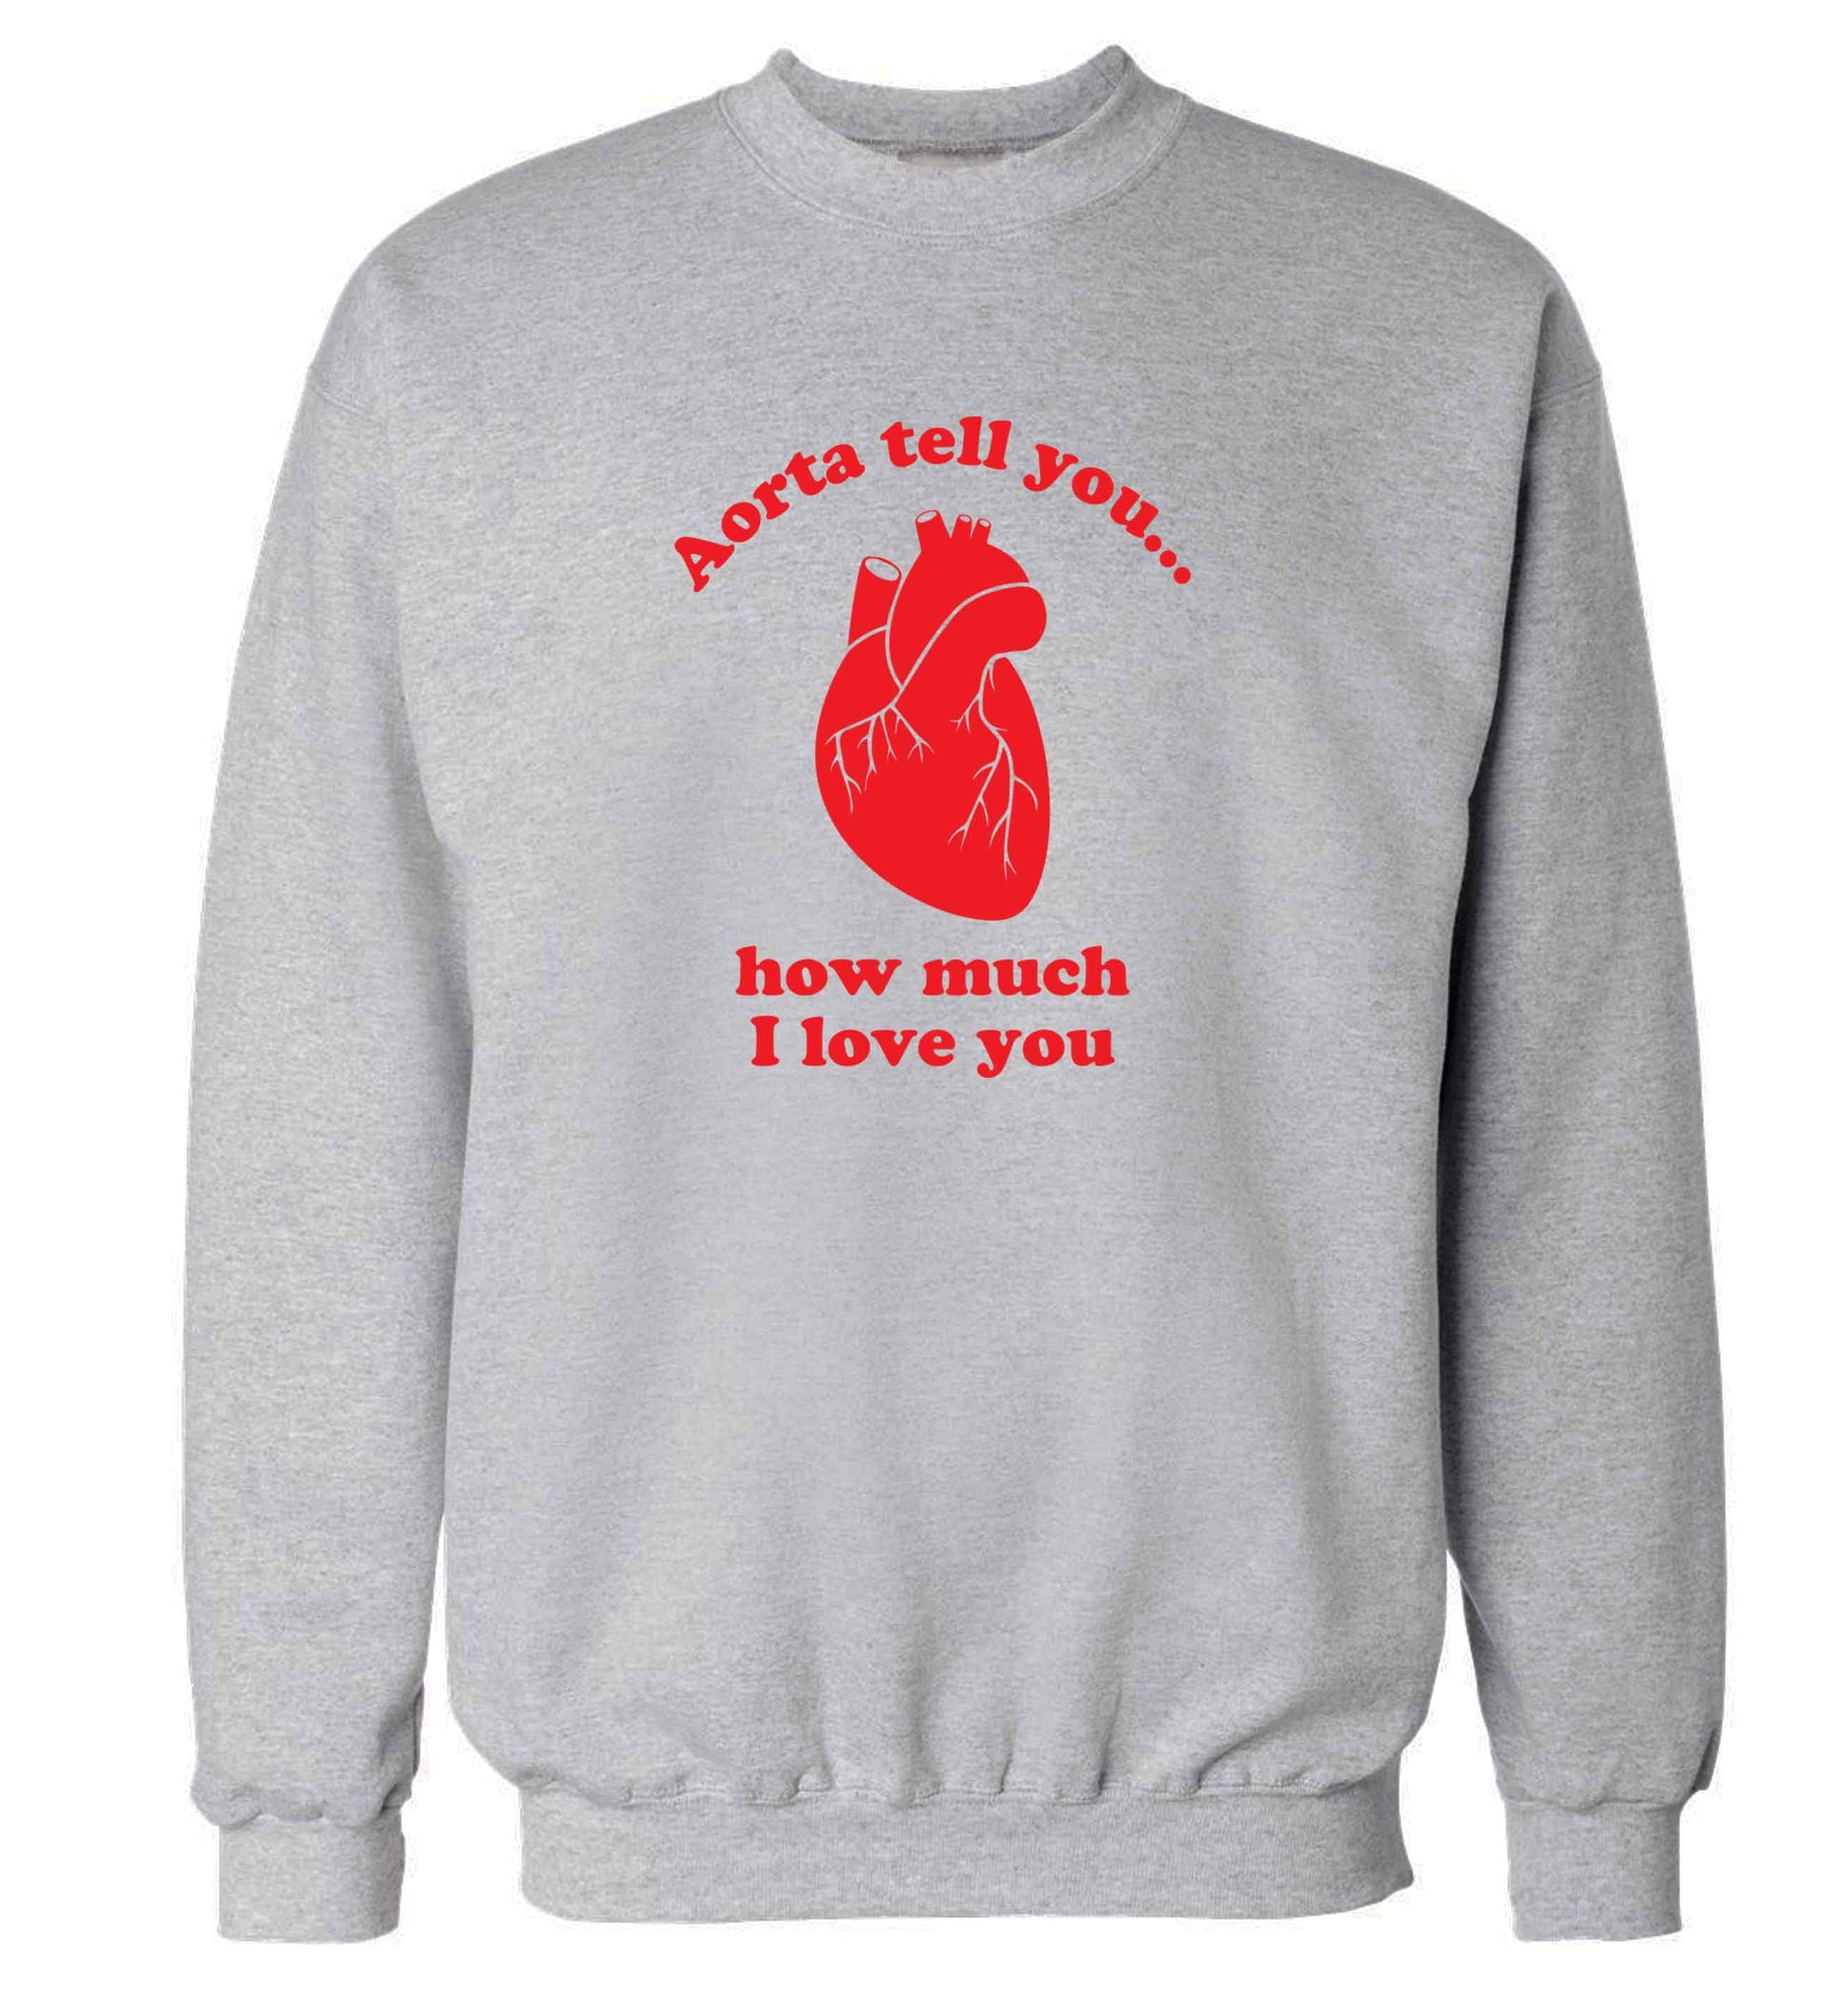 Aorta tell you how much I love you adult's unisex grey sweater 2XL